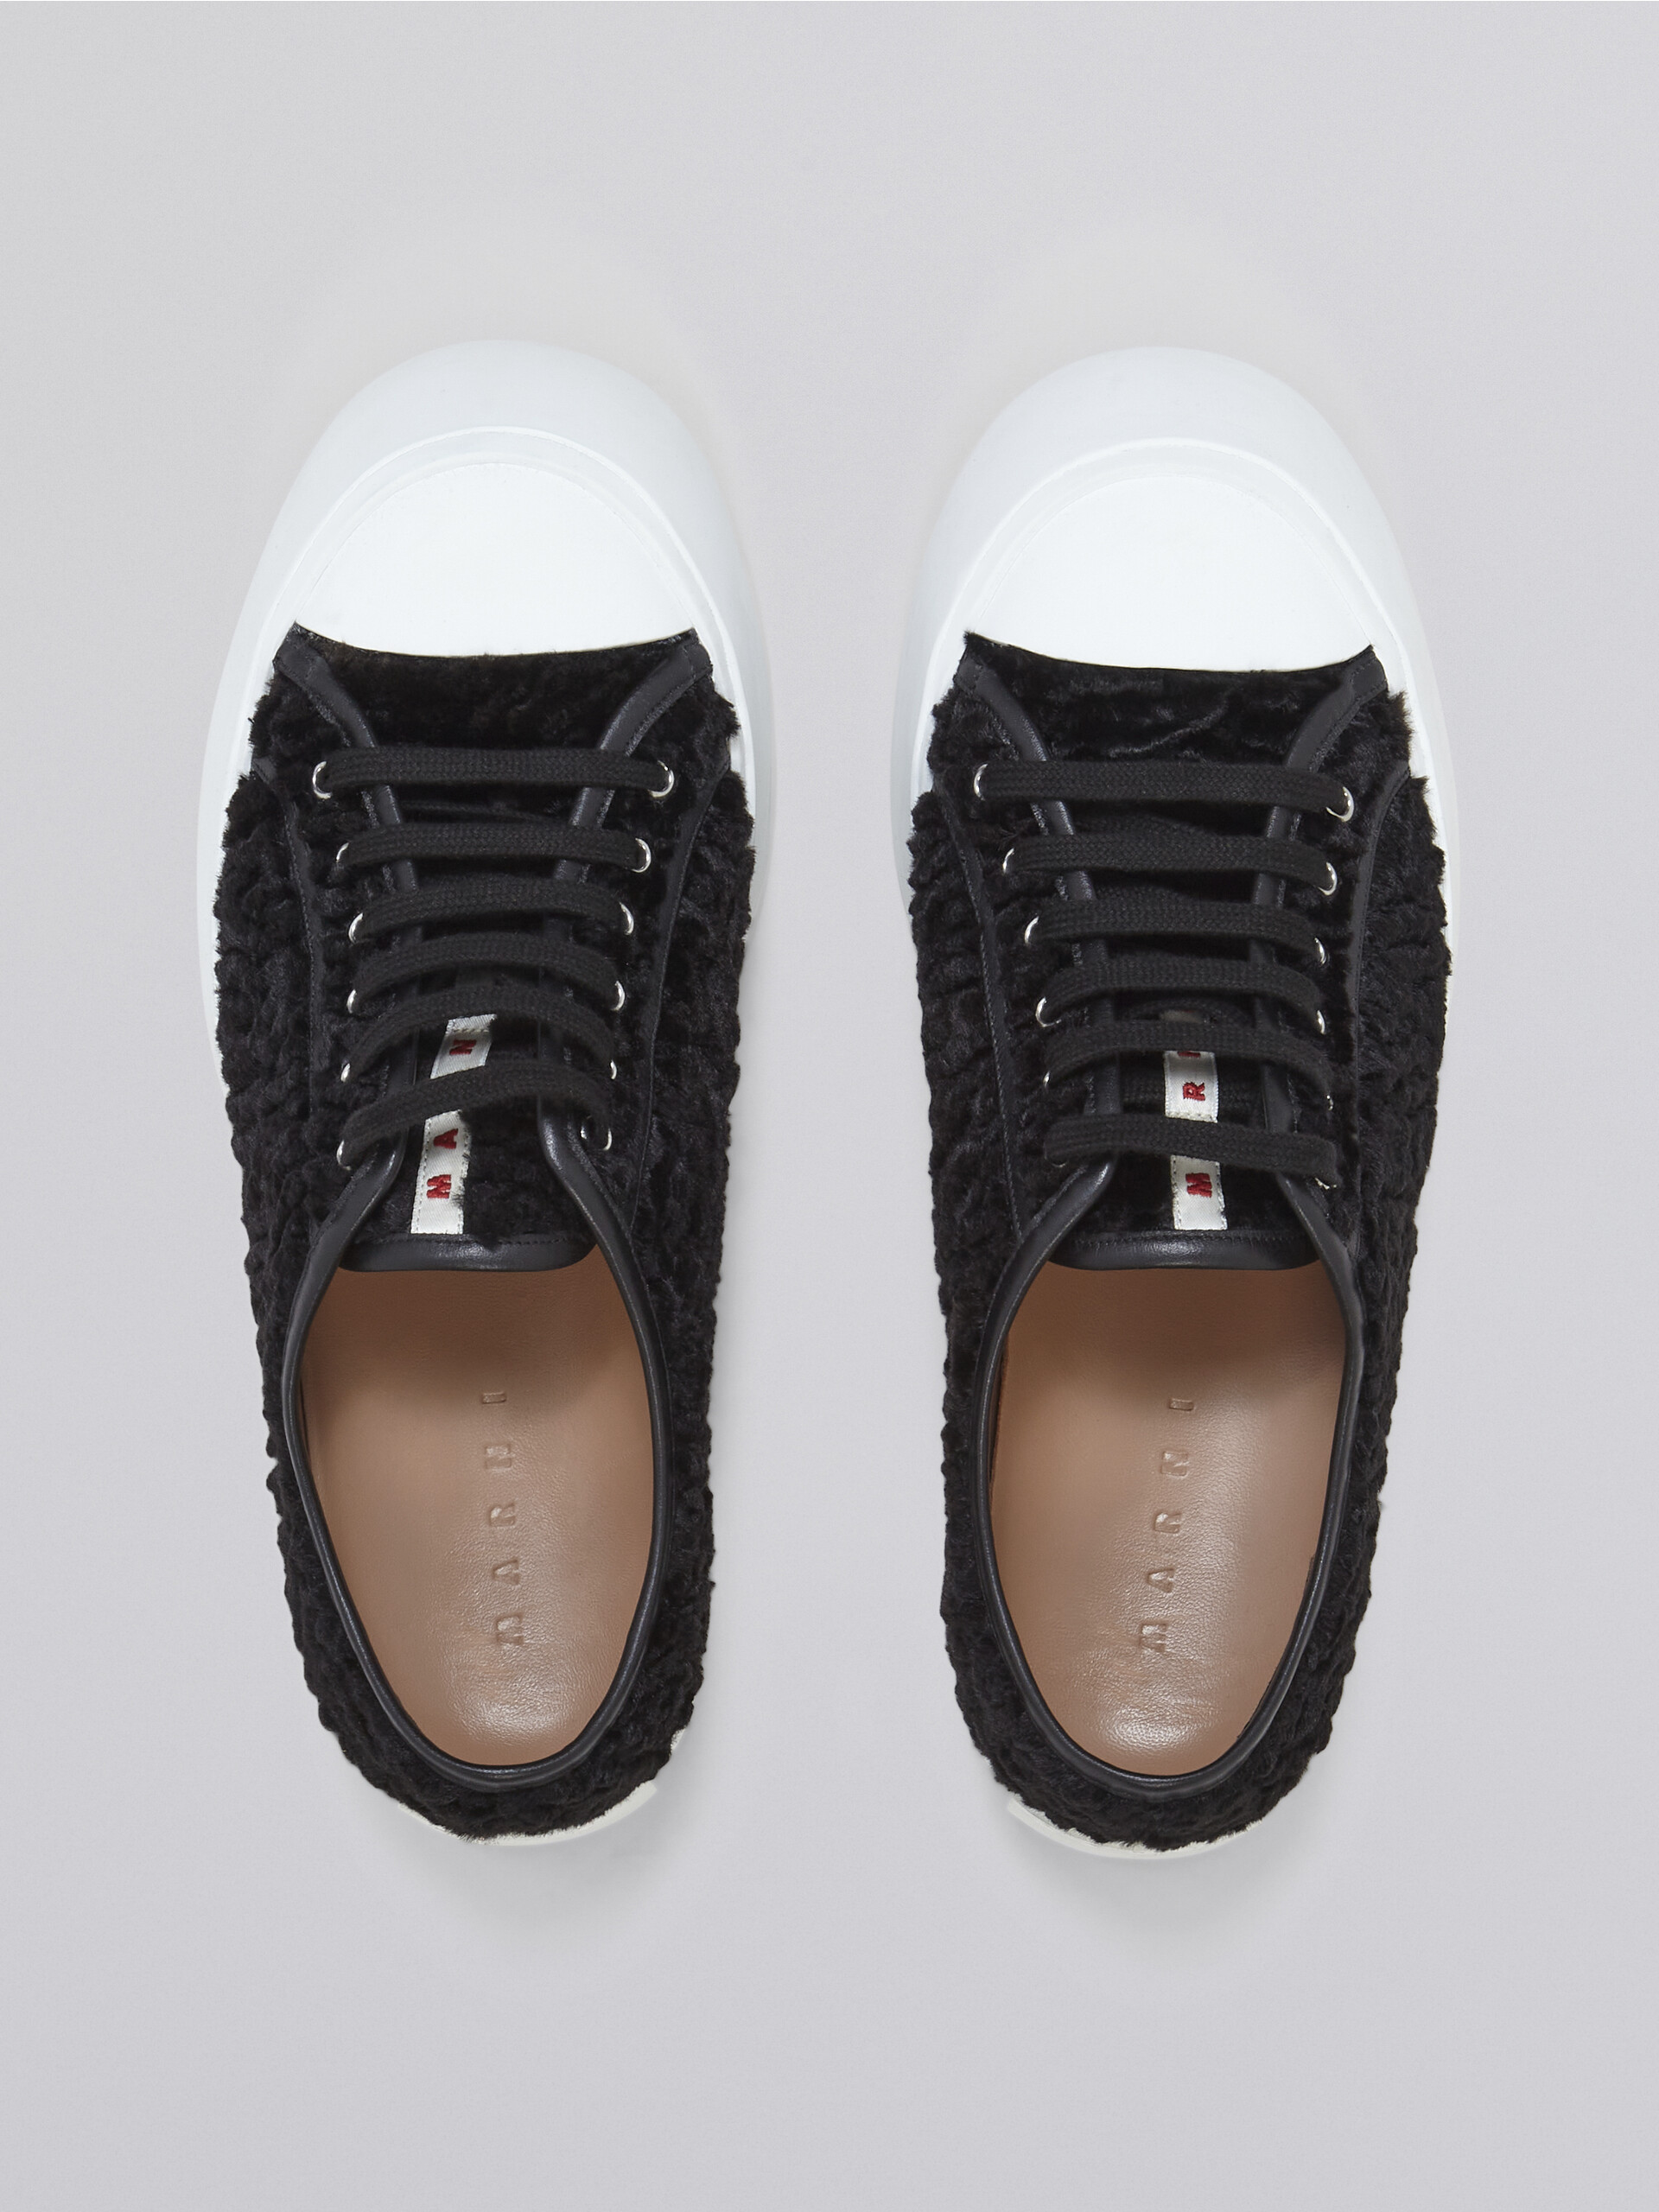 Black soft calf leather PABLO sneaker - Sneakers - Image 4